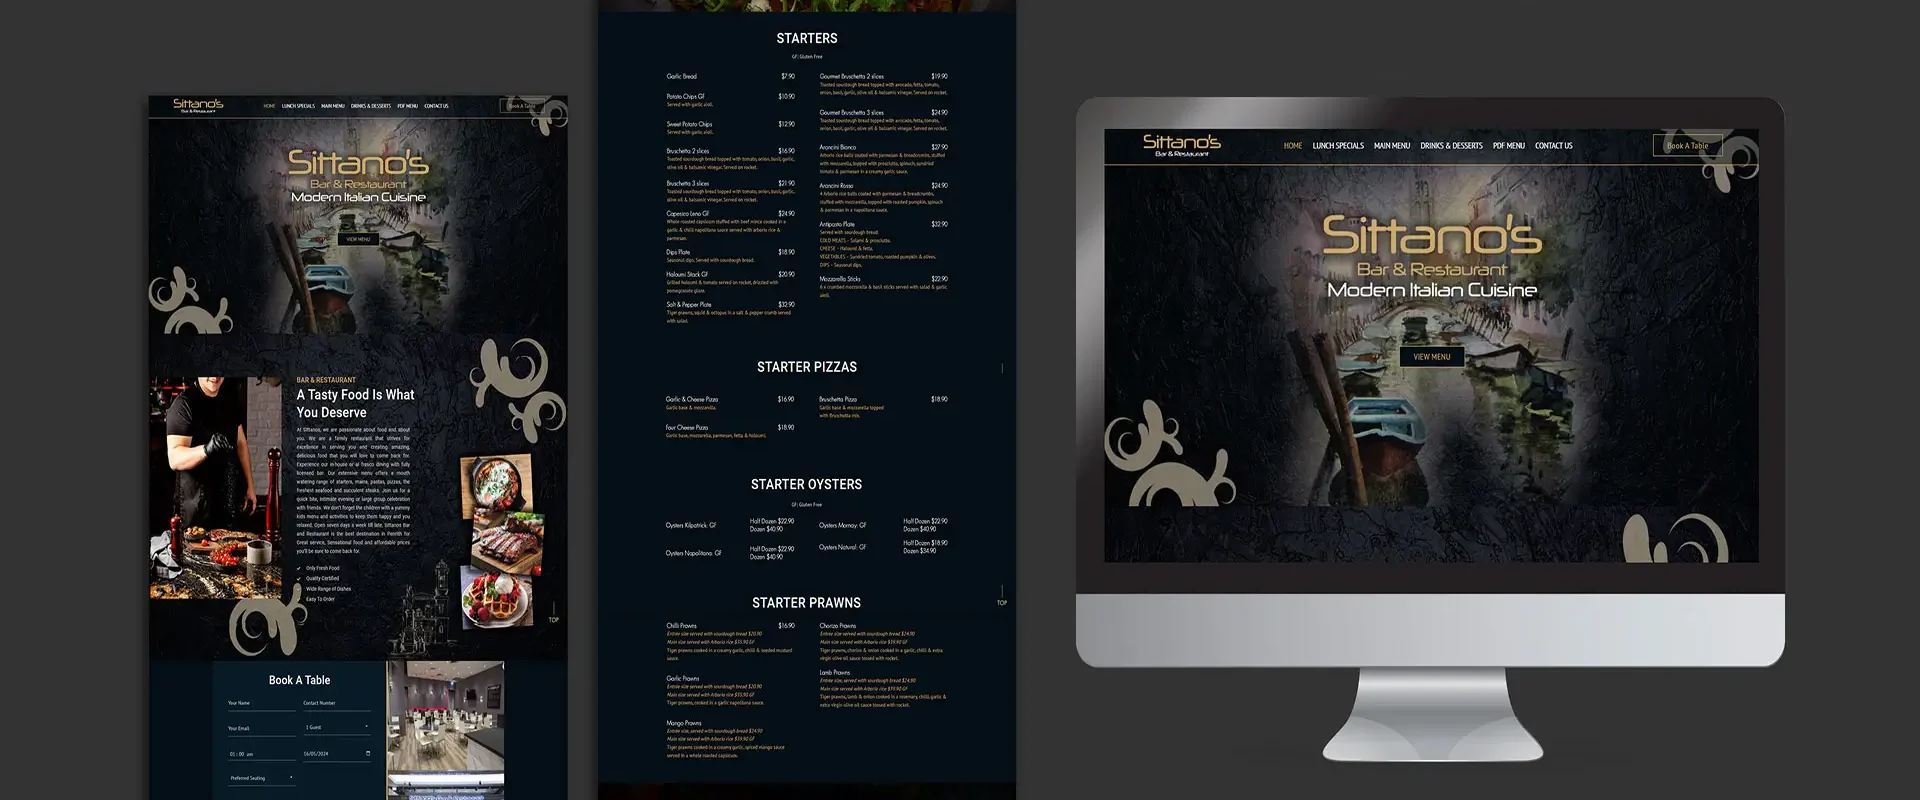 A mockup of an Italian restaurant website development, featuring a modern interface with images of Italian cuisine, rustic decor, and easy navigation.